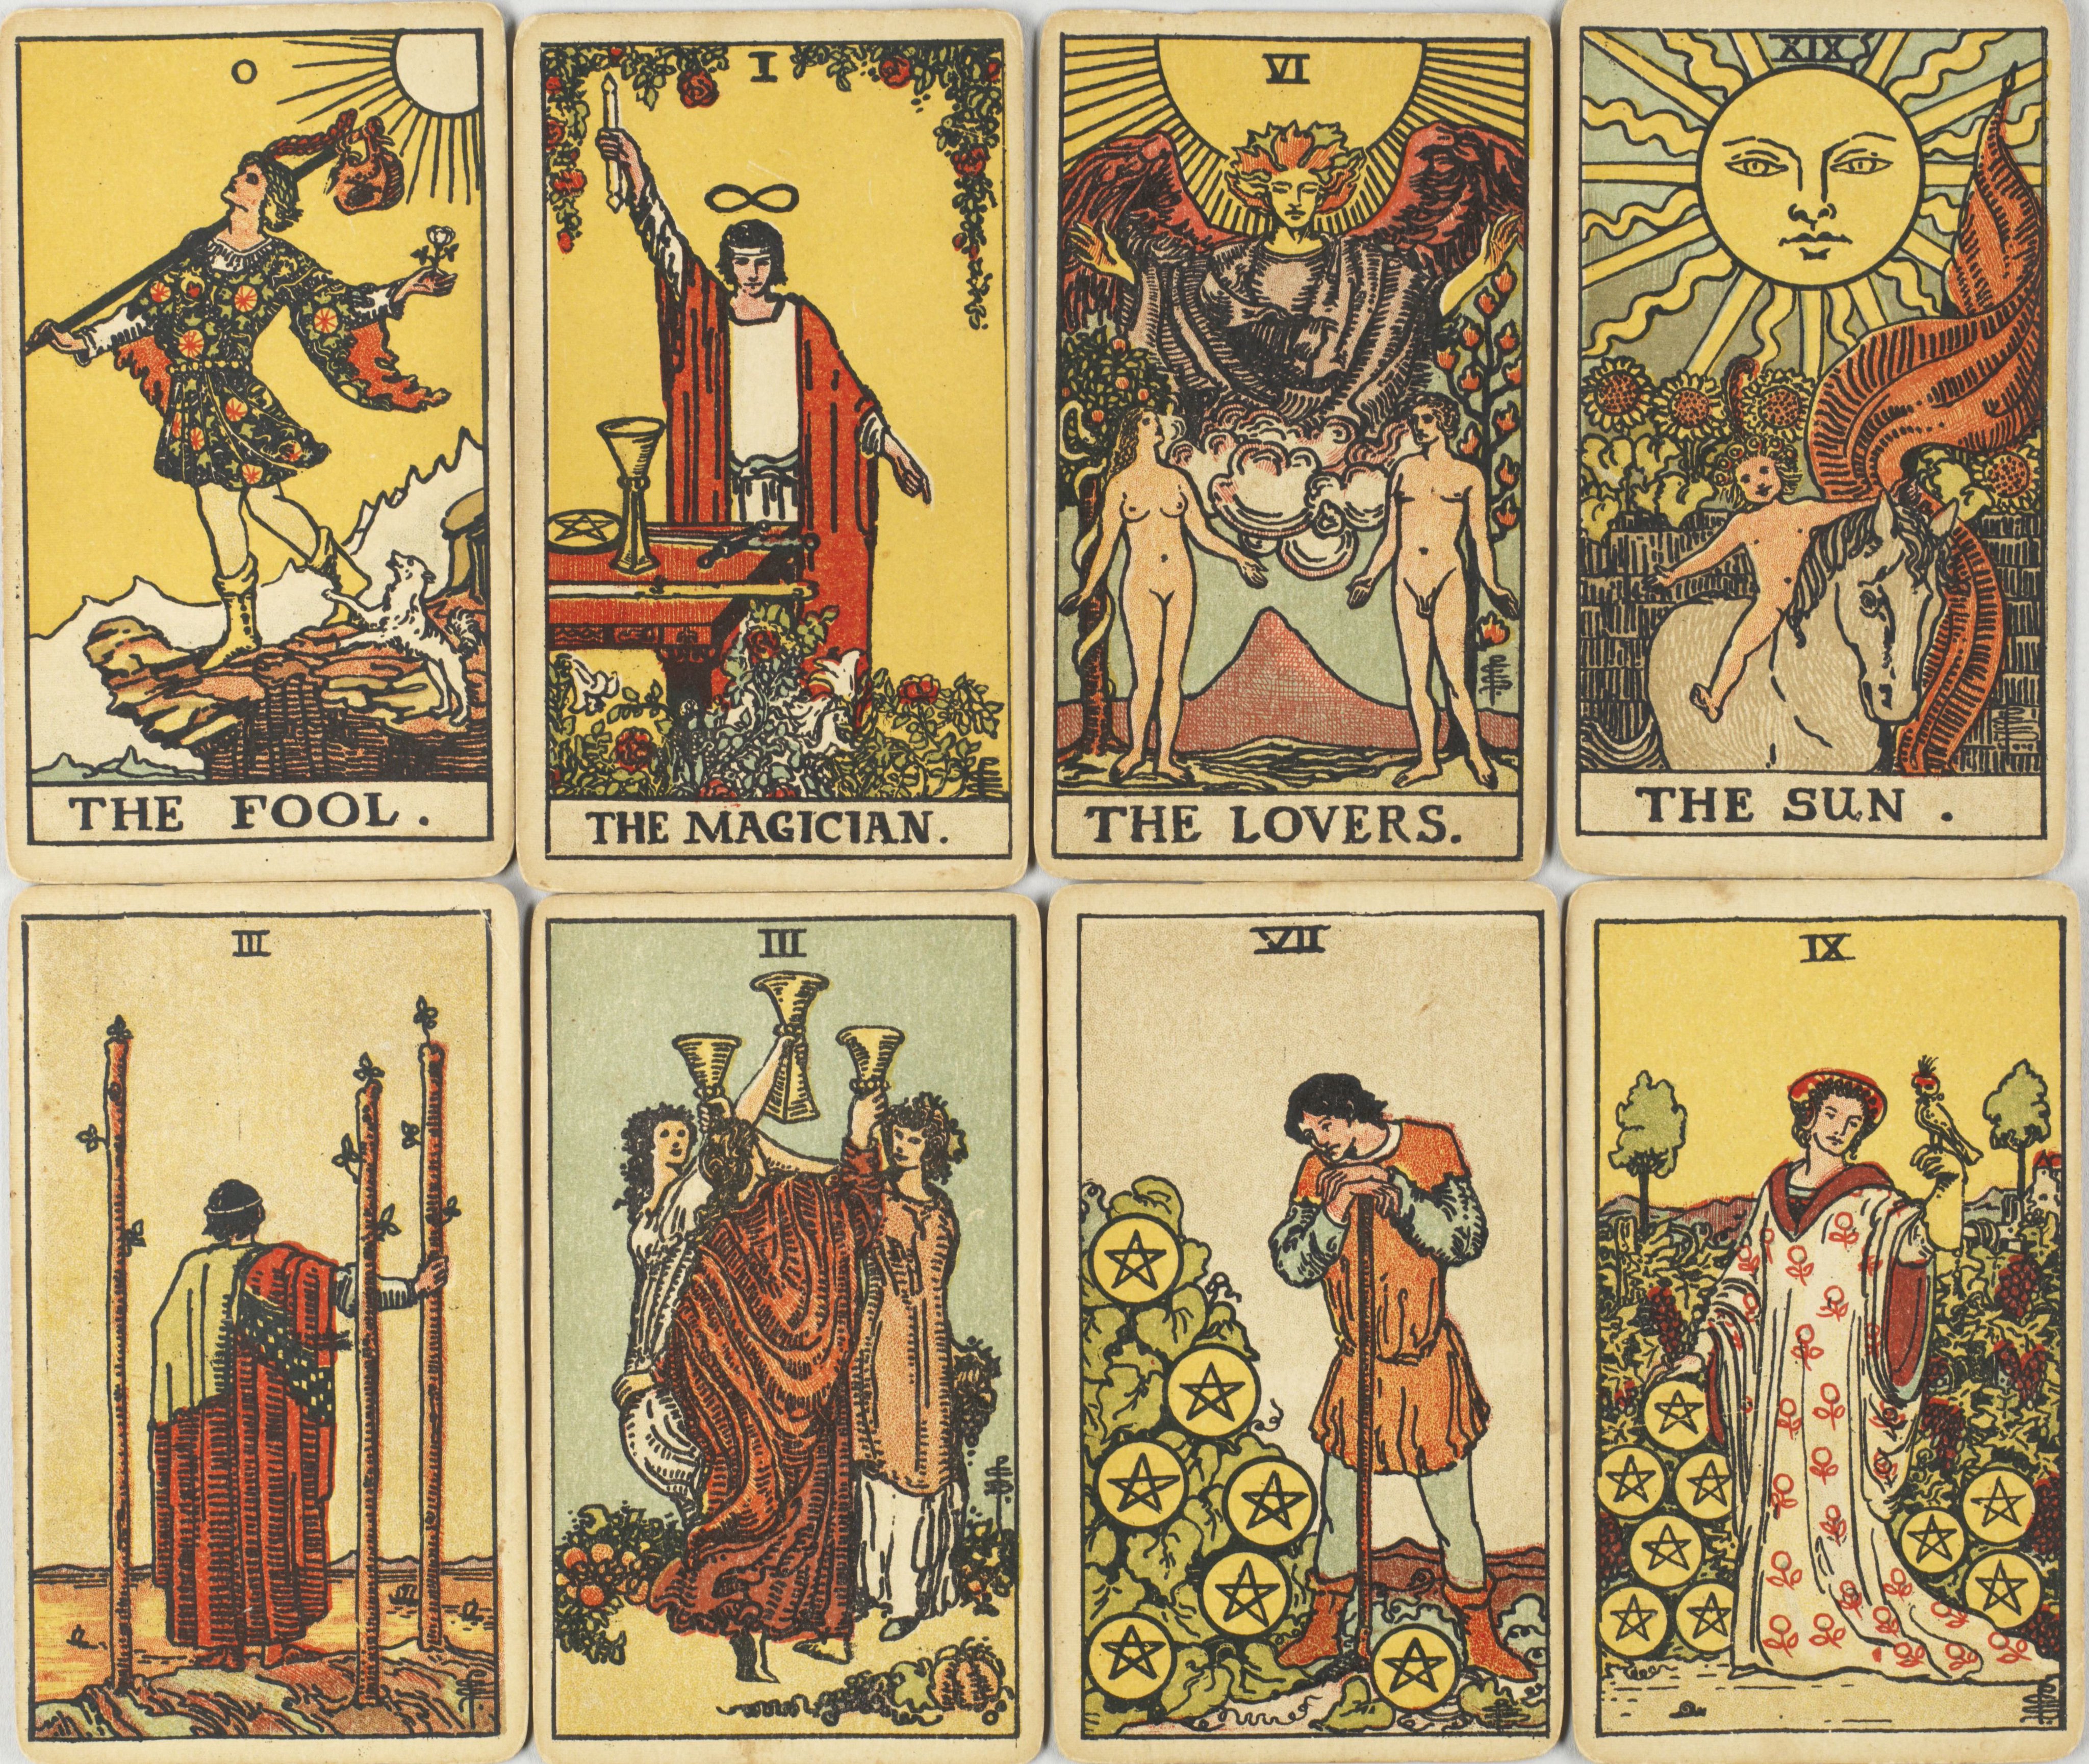 Bukser mode Sæt tøj væk Whitney Museum on Twitter: "The artist behind the world's most famous tarot  deck was almost lost in history. ✨🔮 In 1909 artist Pamela Colman Smith  created the first tarot card deck to